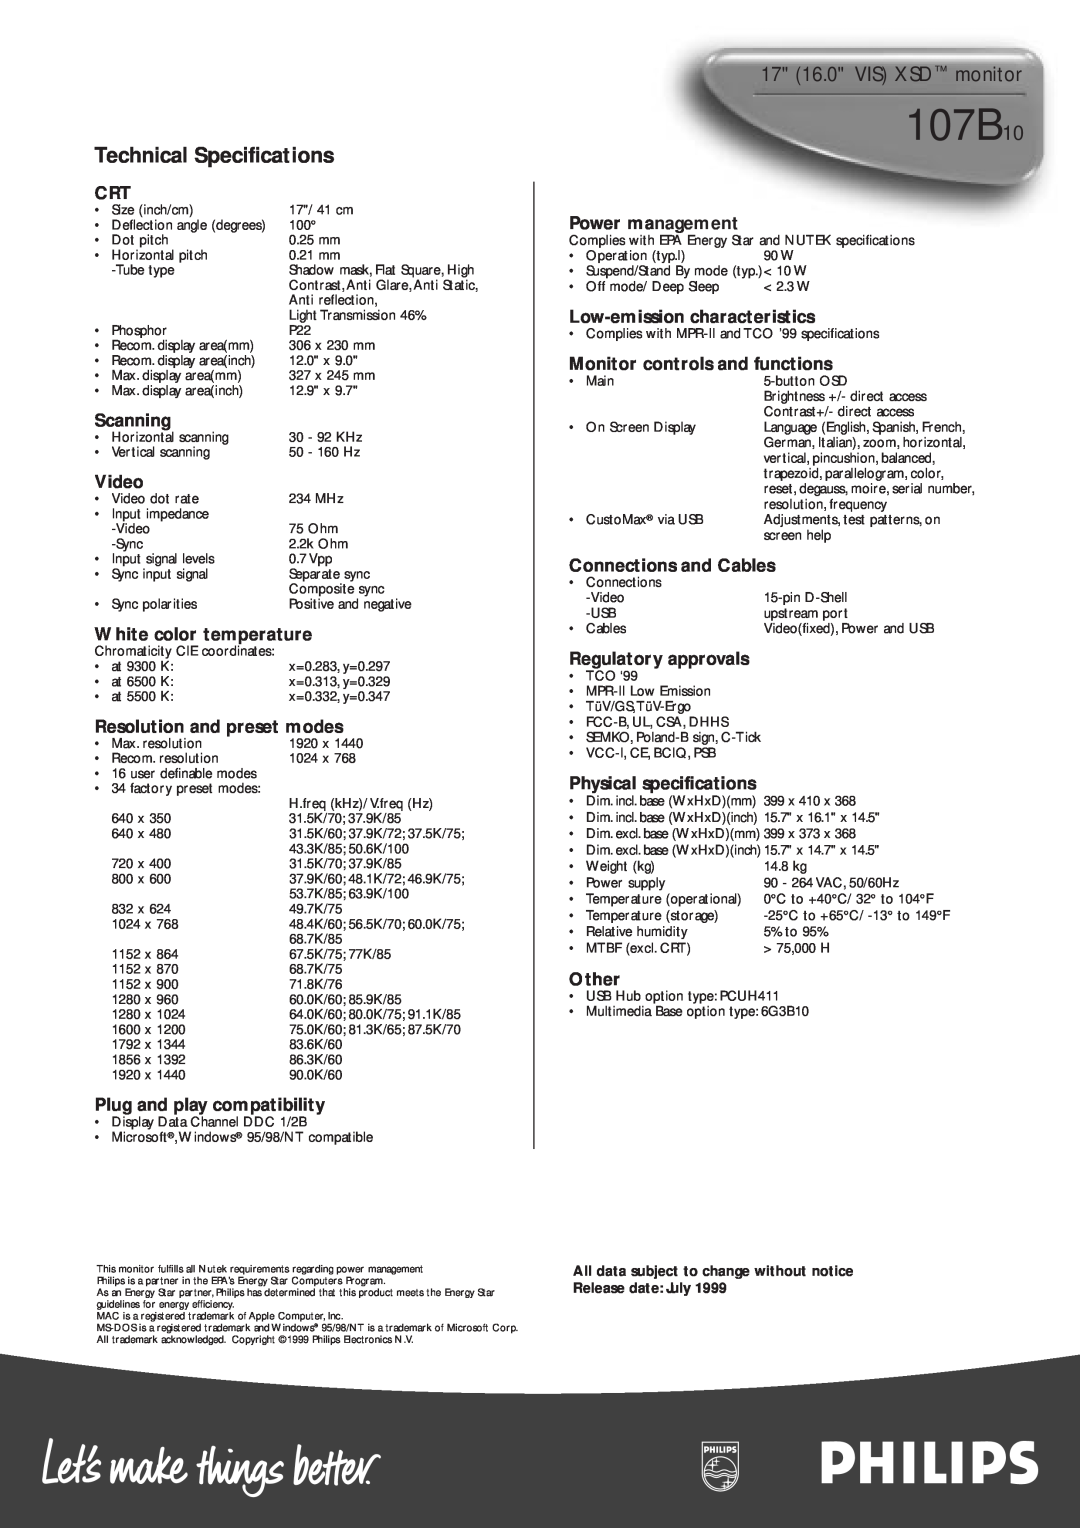 Philips 107B10 manual Technical Specifications, 17 16.0 VIS XSD monitor 